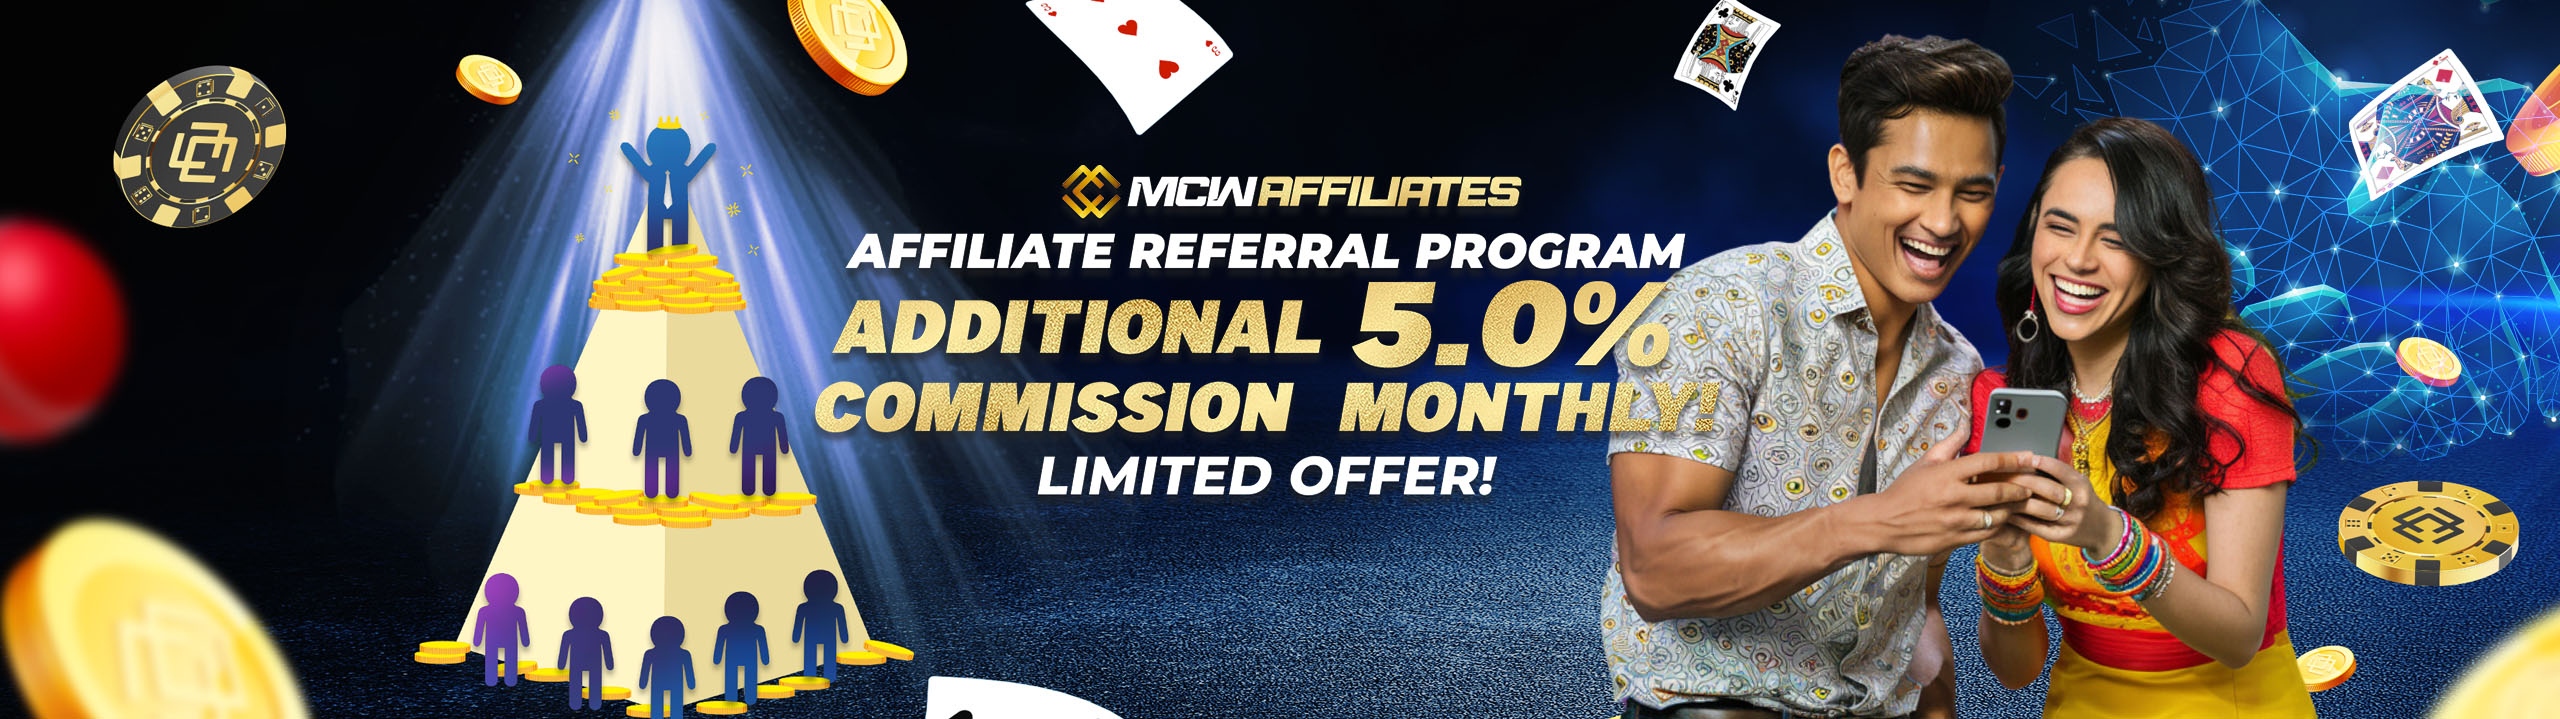 New Affiliates Exclusive Offers